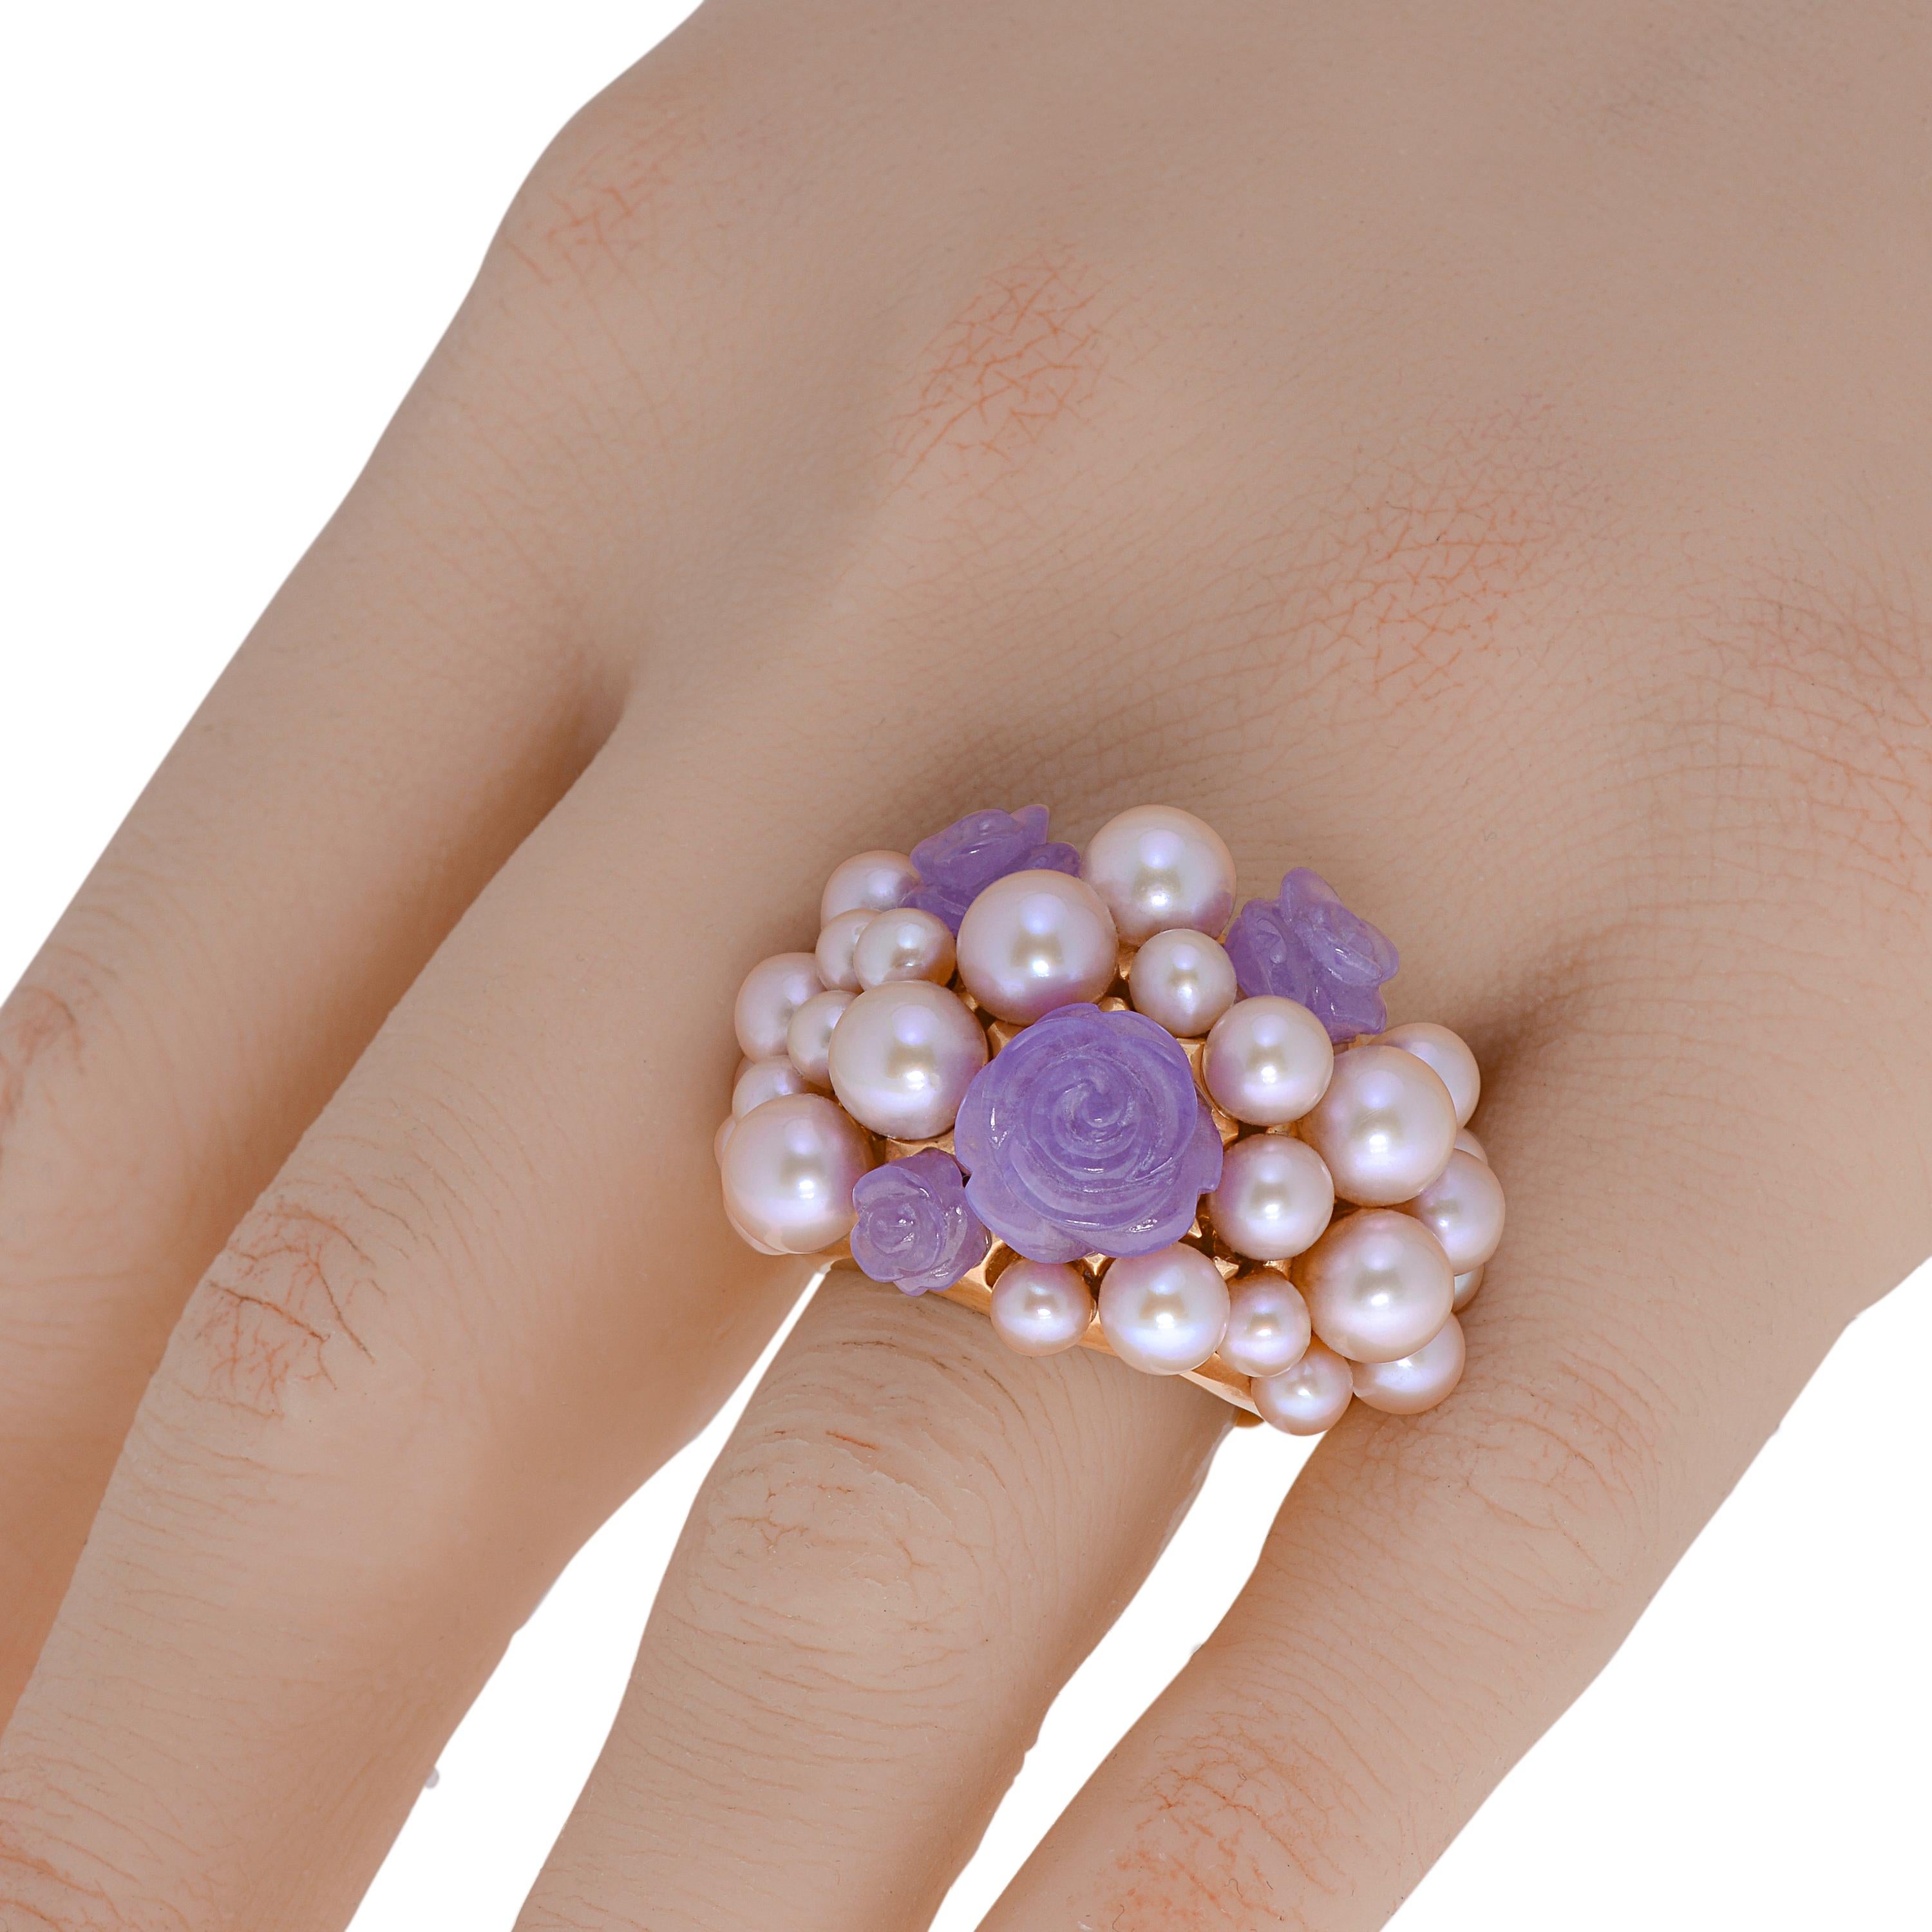 This ornate Mimi Milano 18K rose gold cocktail ring features 4-6mm violet cultured pearls elevated with 11.40ct. tw. Lavender Jade roses. The ring size is 7. The band width is 1/4